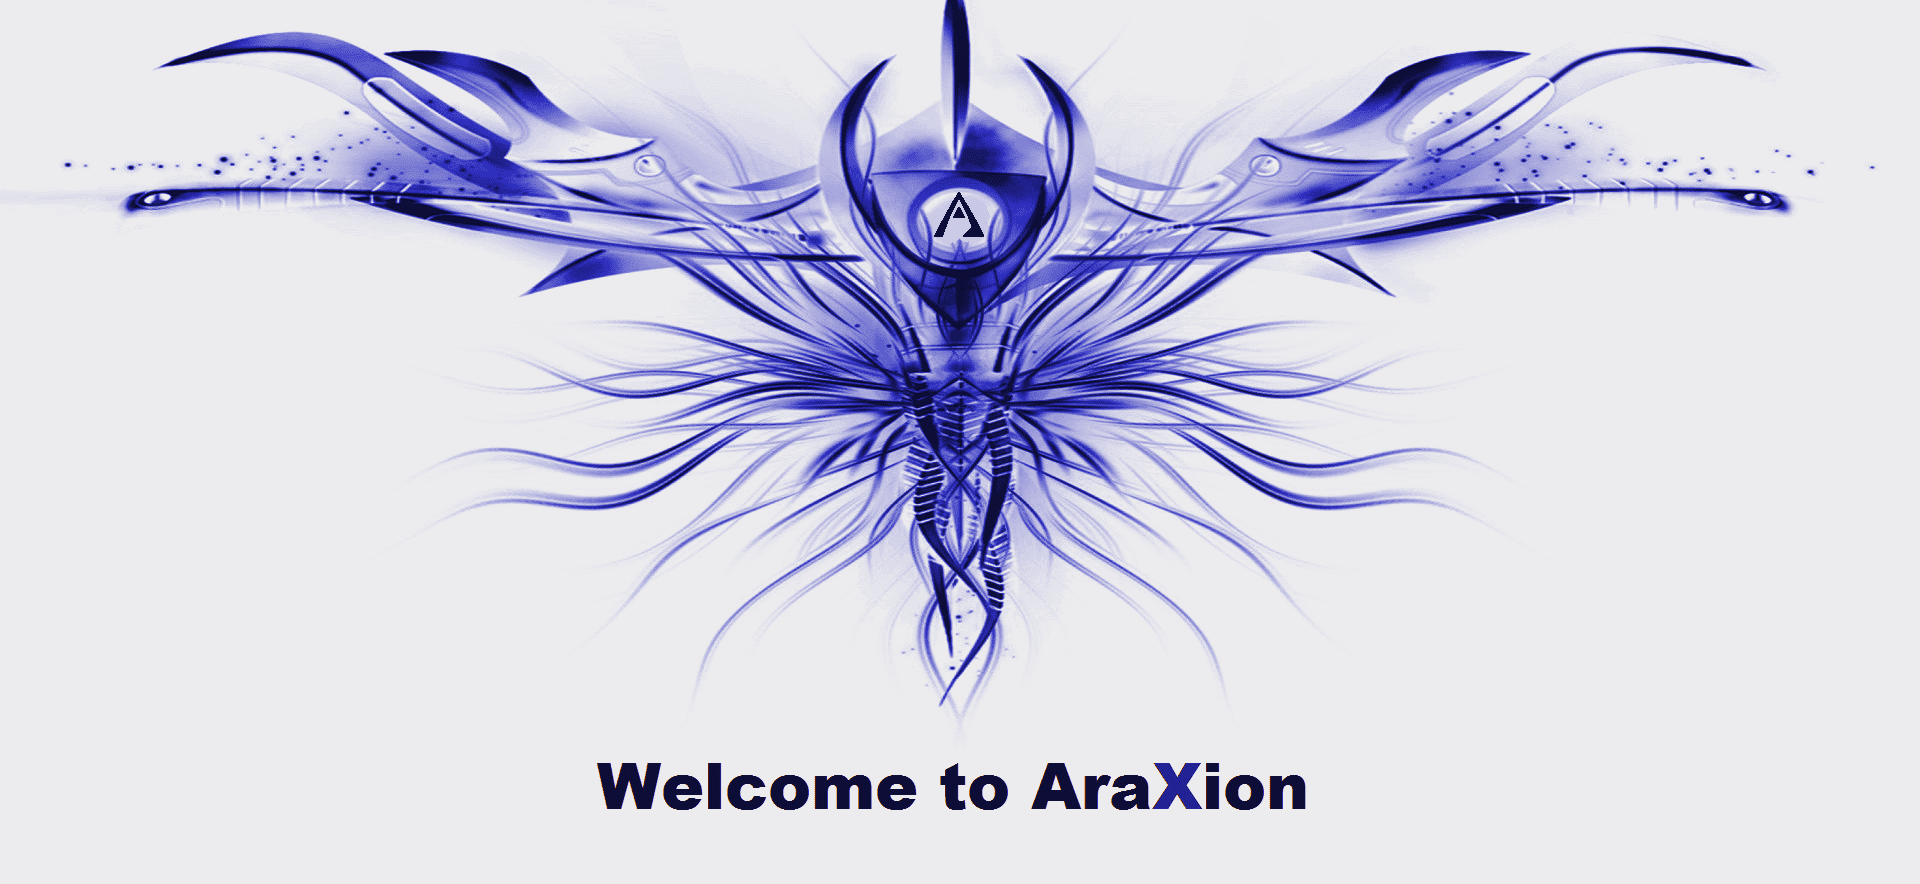 qVwtysU - [SRO] Araxion Online | 100 CAP EU/CH | Intuitive Gameplay & Events | Innovate to Lead - RaGEZONE Forums